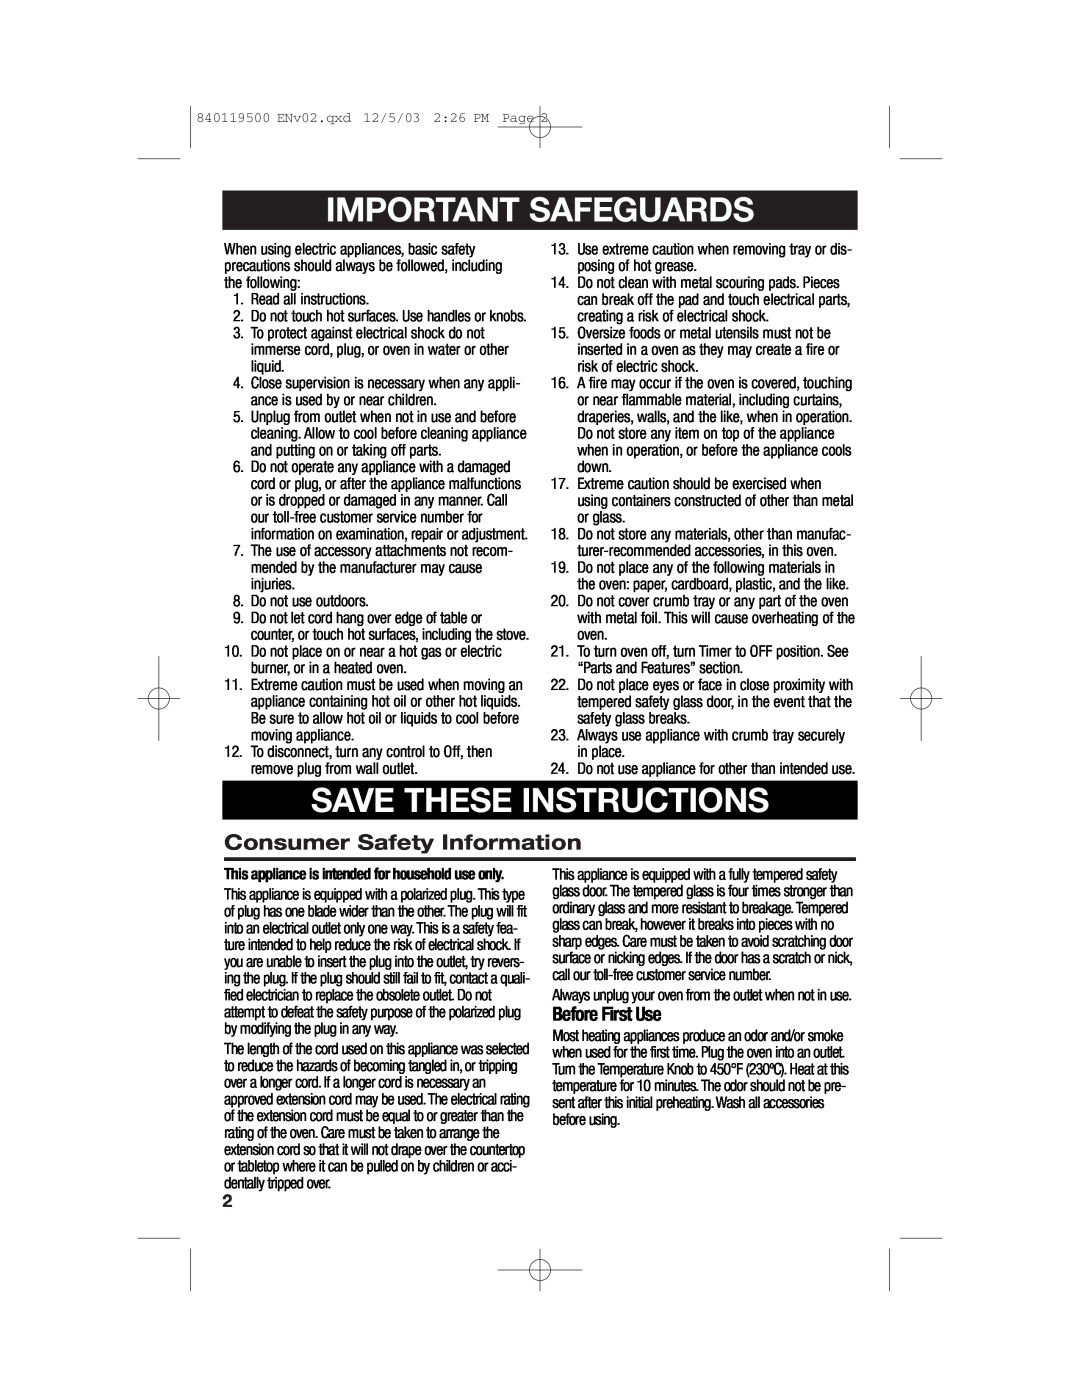 Hamilton Beach 31195 manual Important Safeguards, Save These Instructions, Consumer Safety Information, Before First Use 